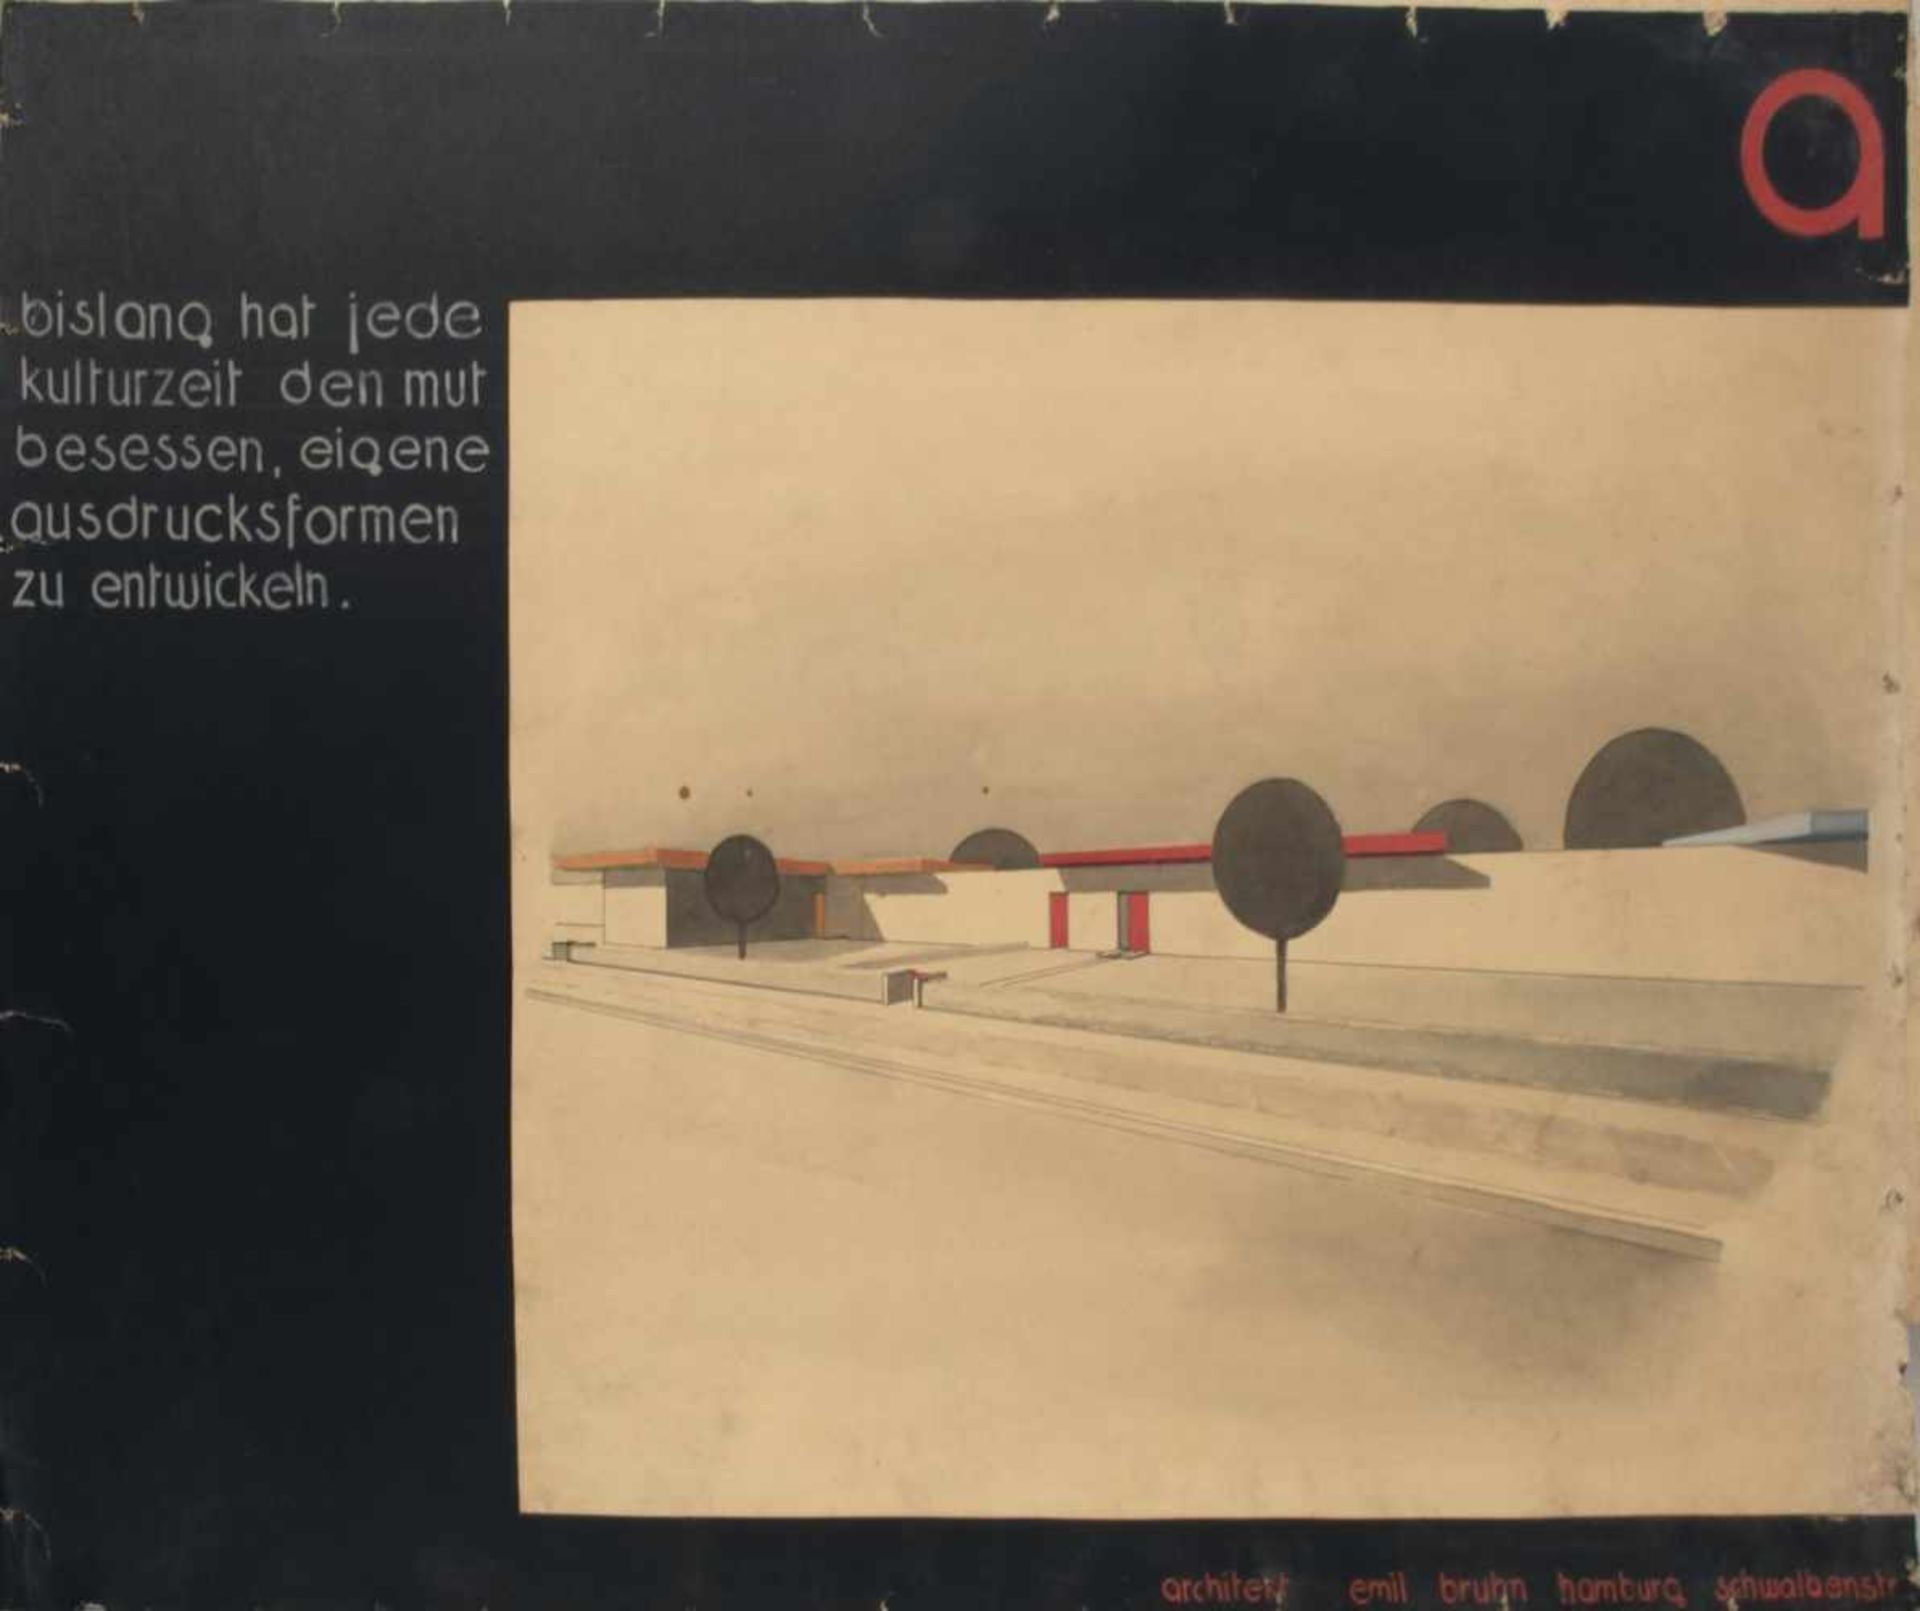 Emil Bruhn, Architectural designs and collages, 1932/33Architectural designs and collages, 1932/3316 - Bild 13 aus 17